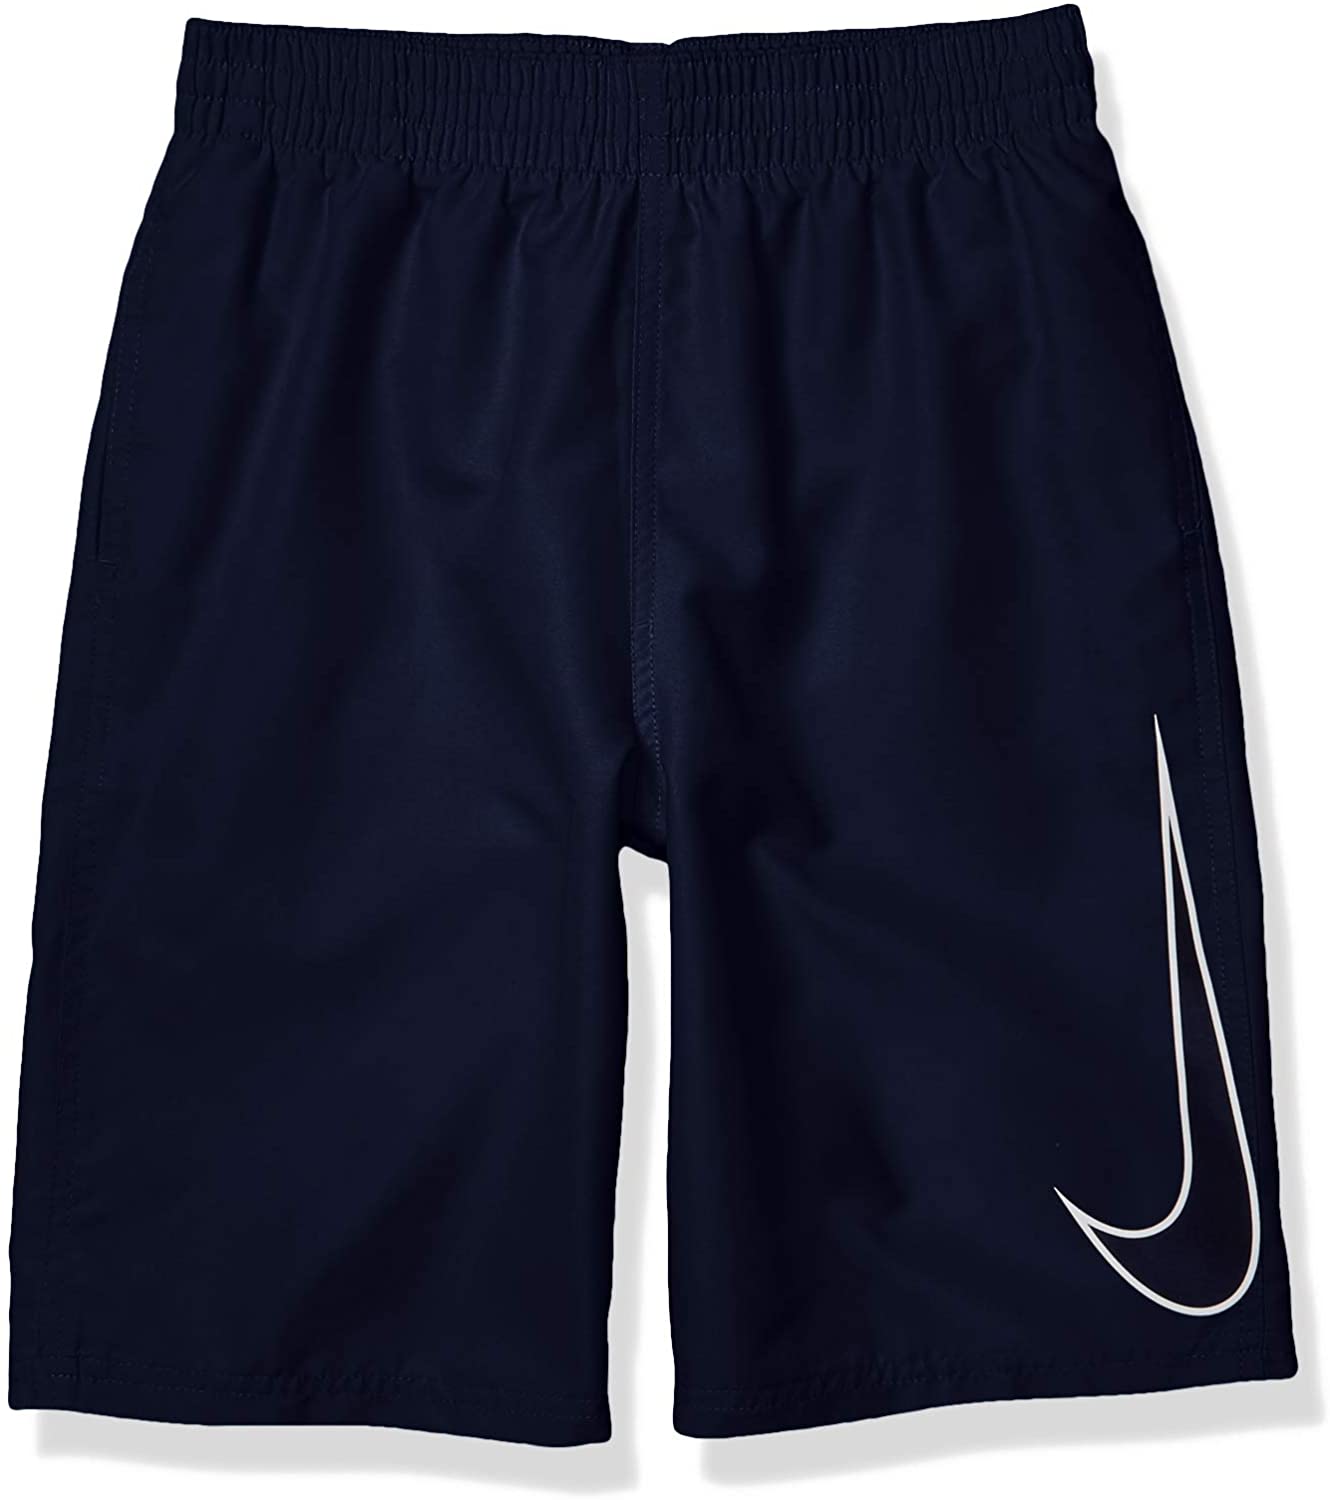 Boy's Nike Big Swoosh Solid Lap Volley Short Swim Trunk in Midnight Navy color from the front